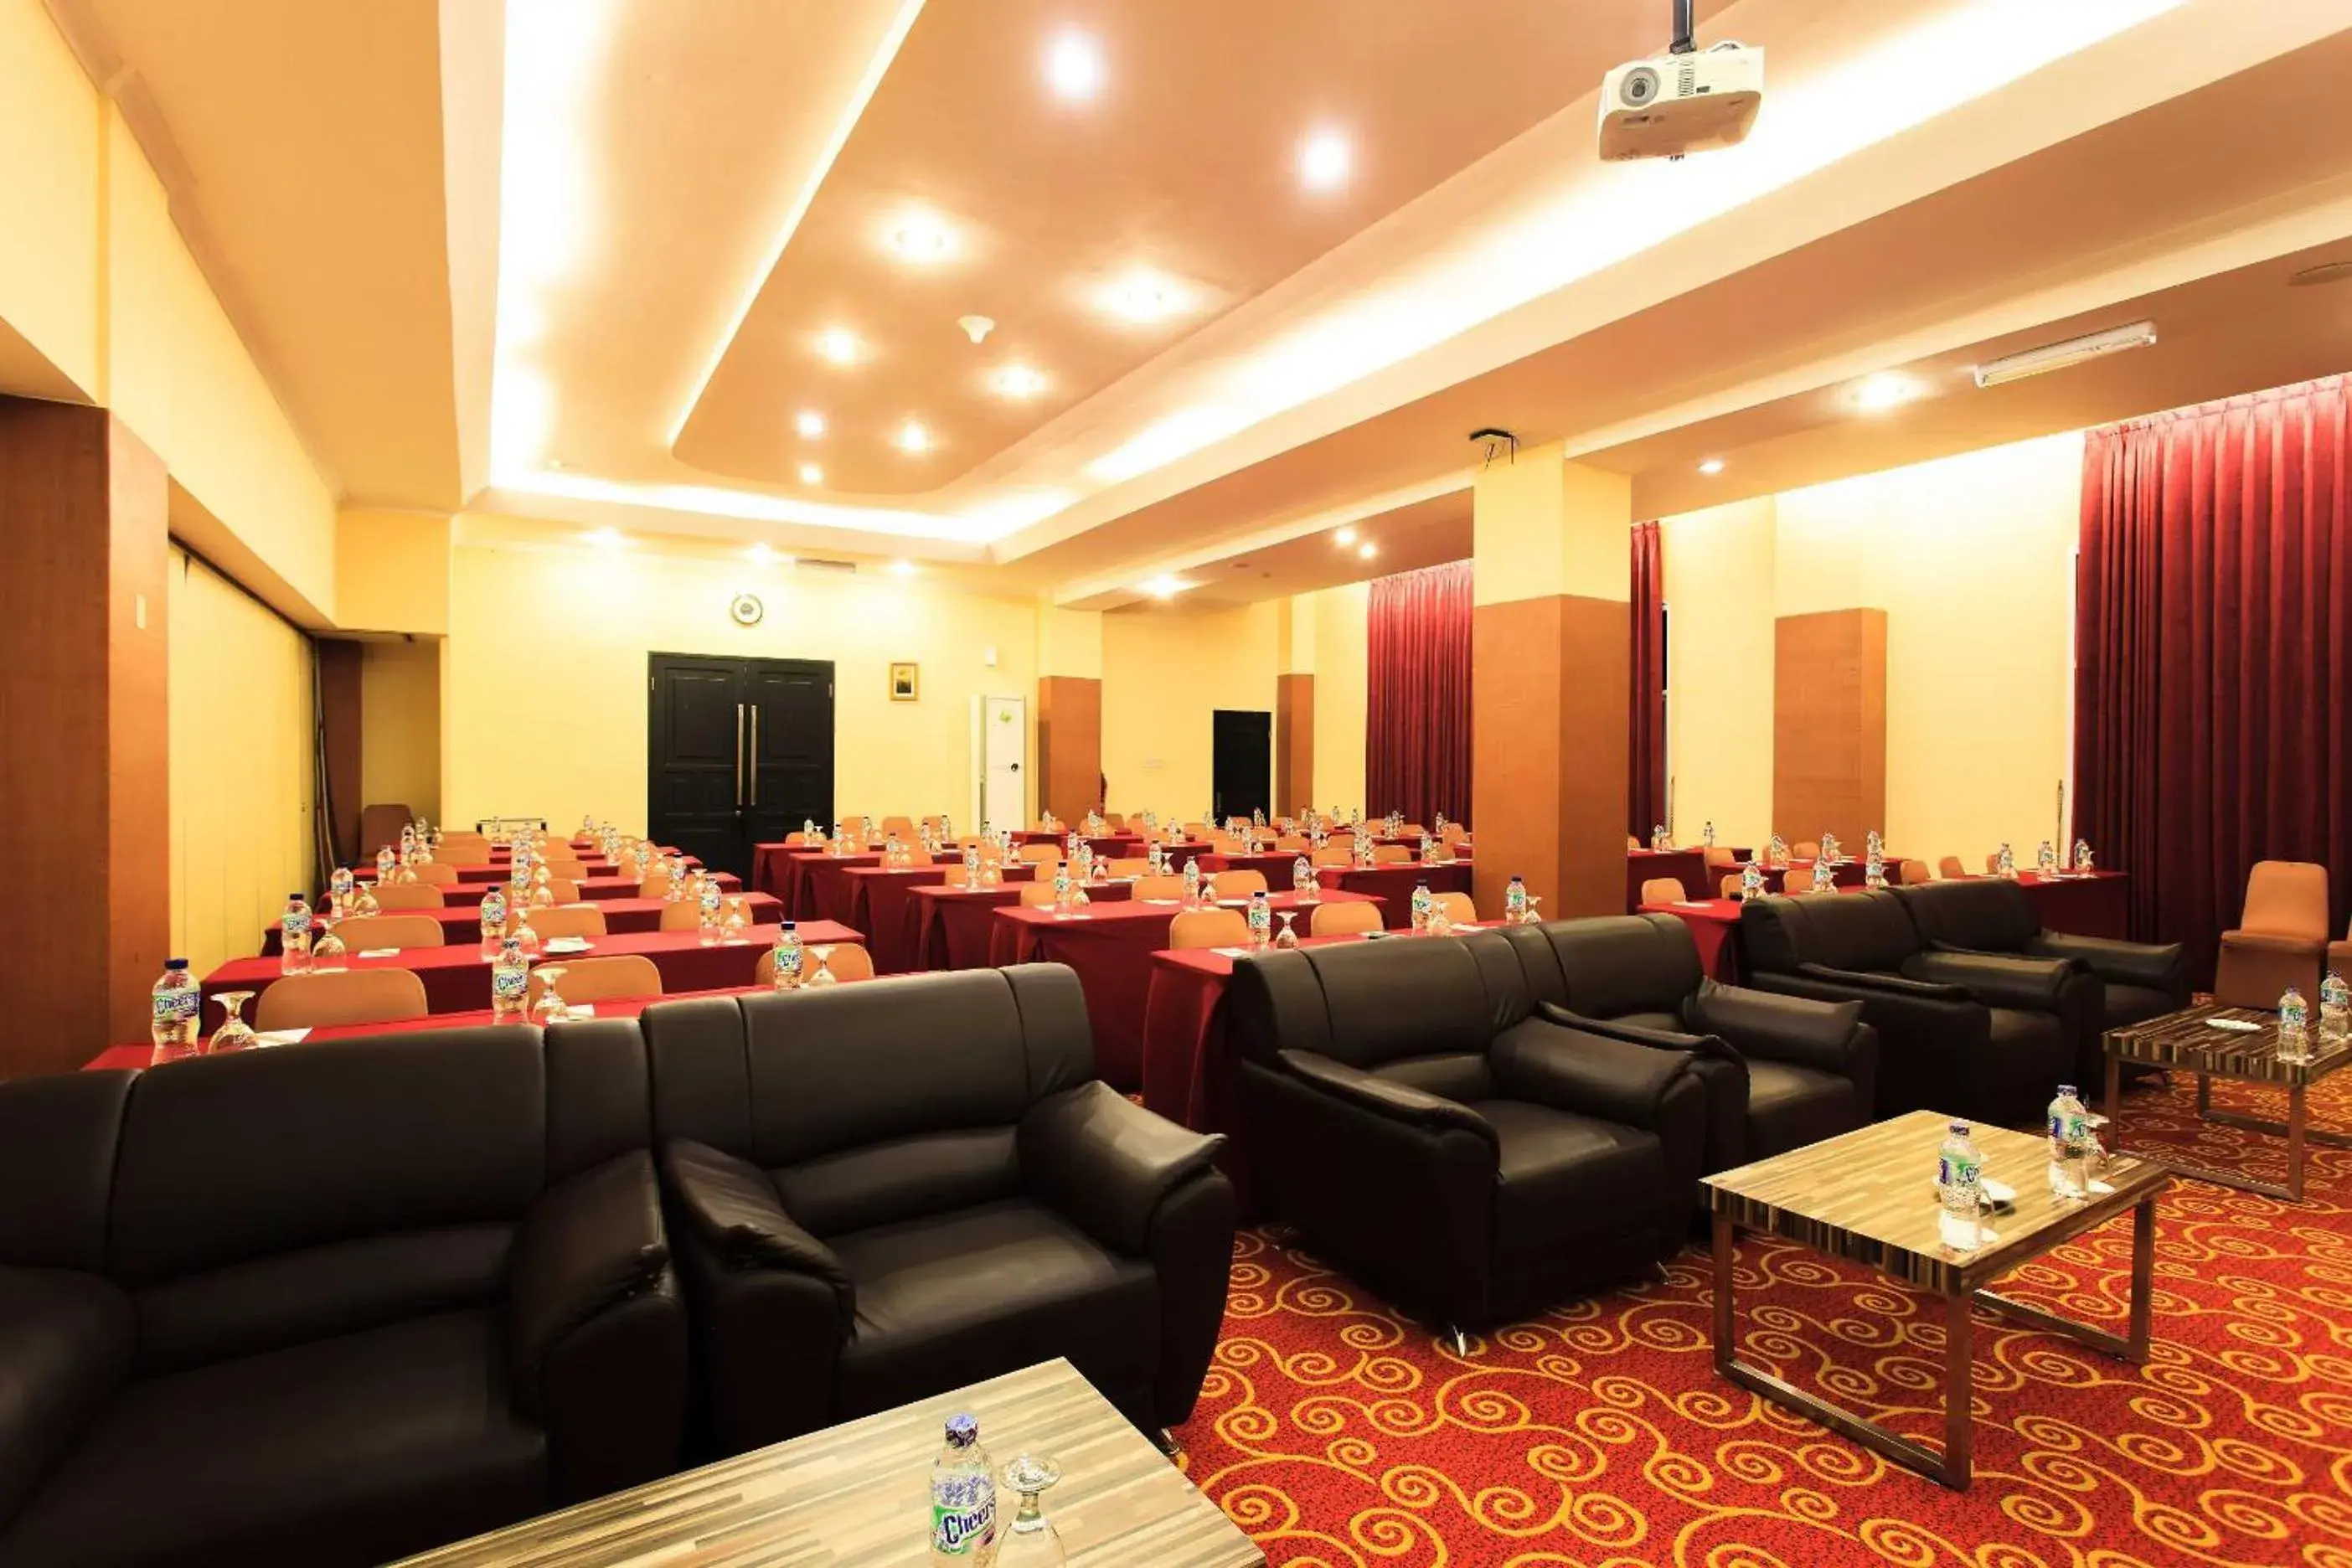 Meeting/conference room in ASTON Niu Manokwari Hotel & Conference Center